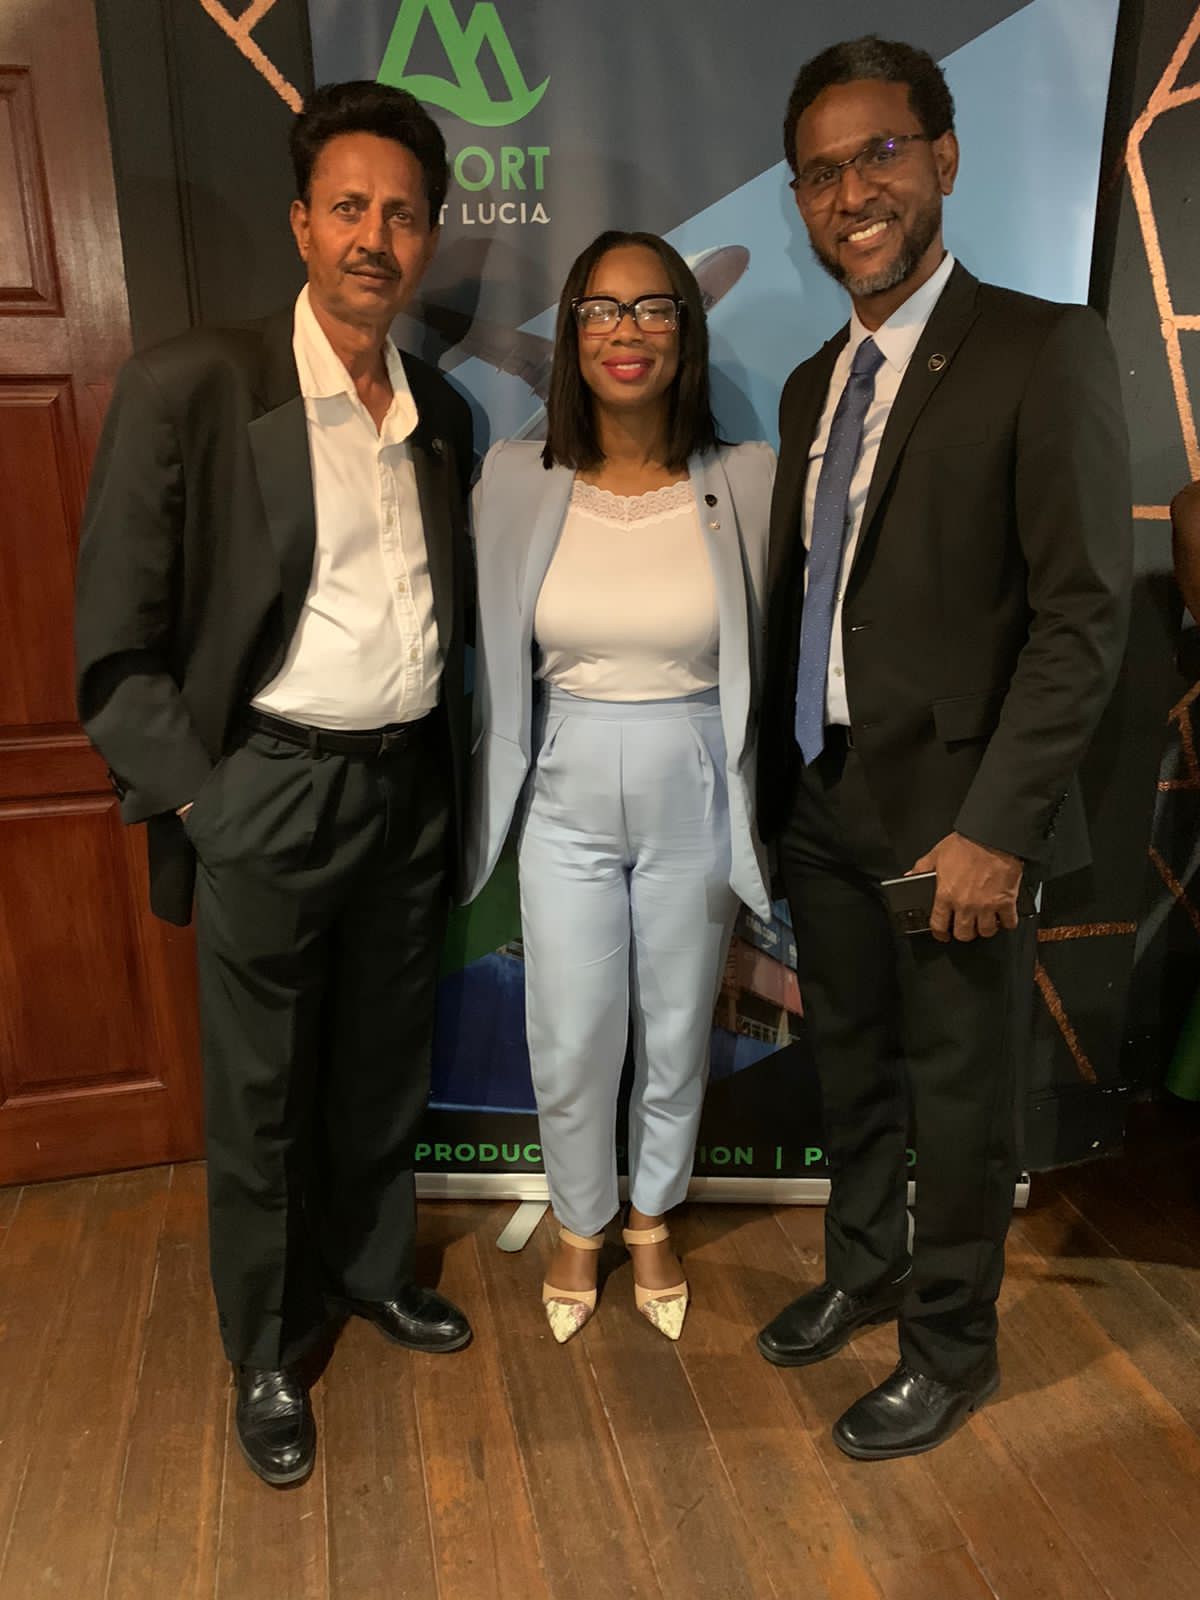 GCCI attends business mixer hosted by Saint Lucia trade mission